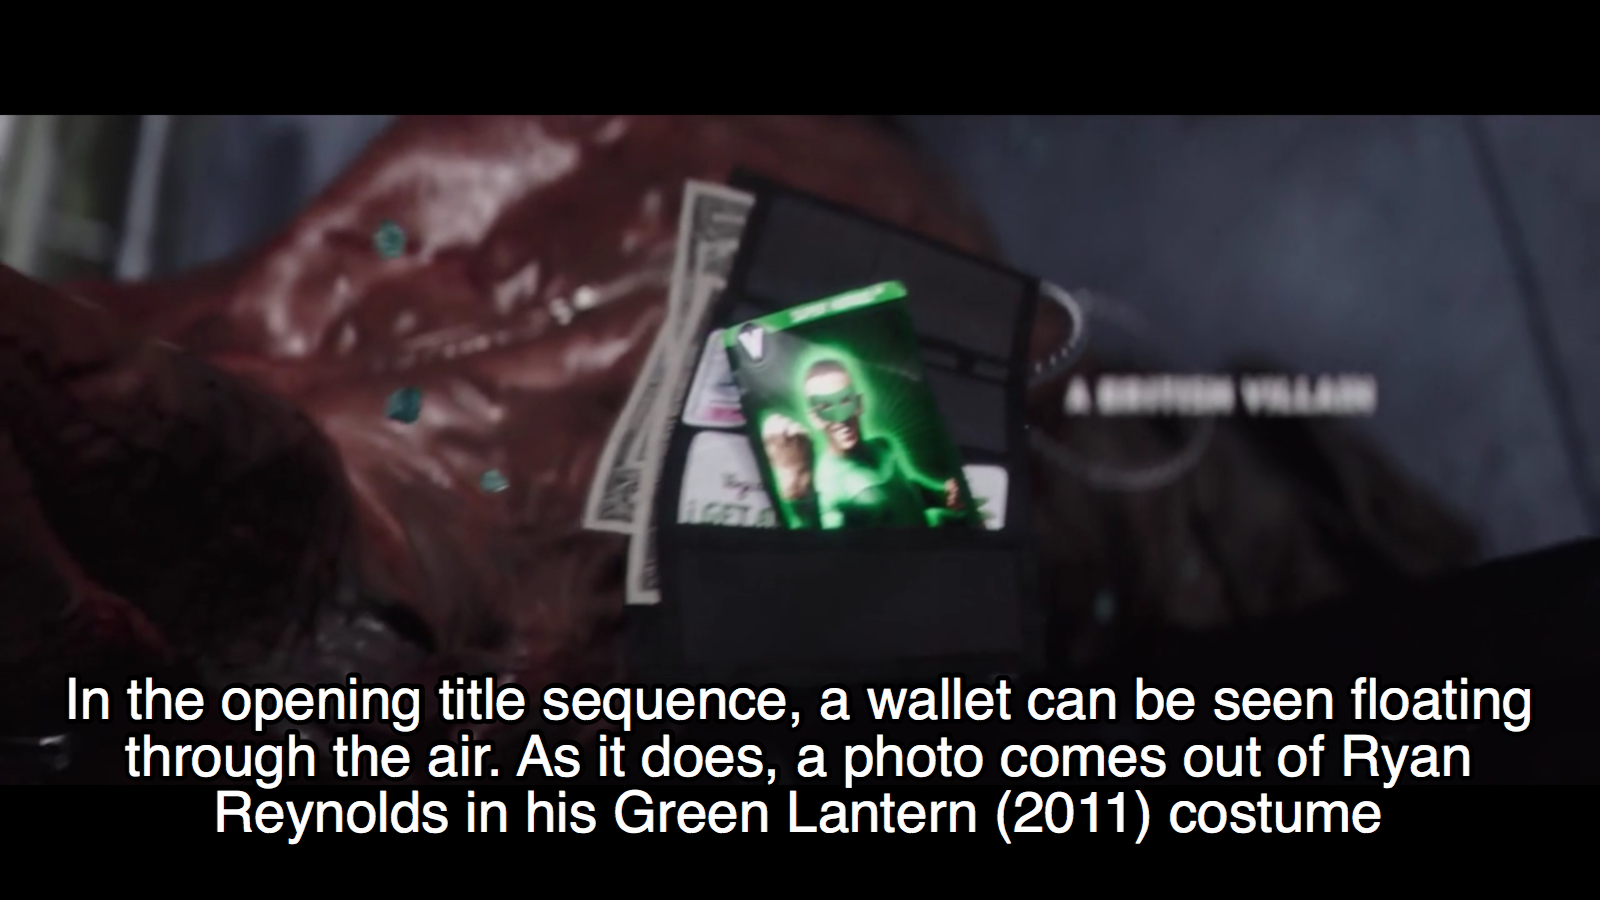 deadpool green lantern picture from wallet - In the opening title sequence, a wallet can be seen floating through the air. As it does, a photo comes out of Ryan Reynolds in his Green Lantern 2011 costume